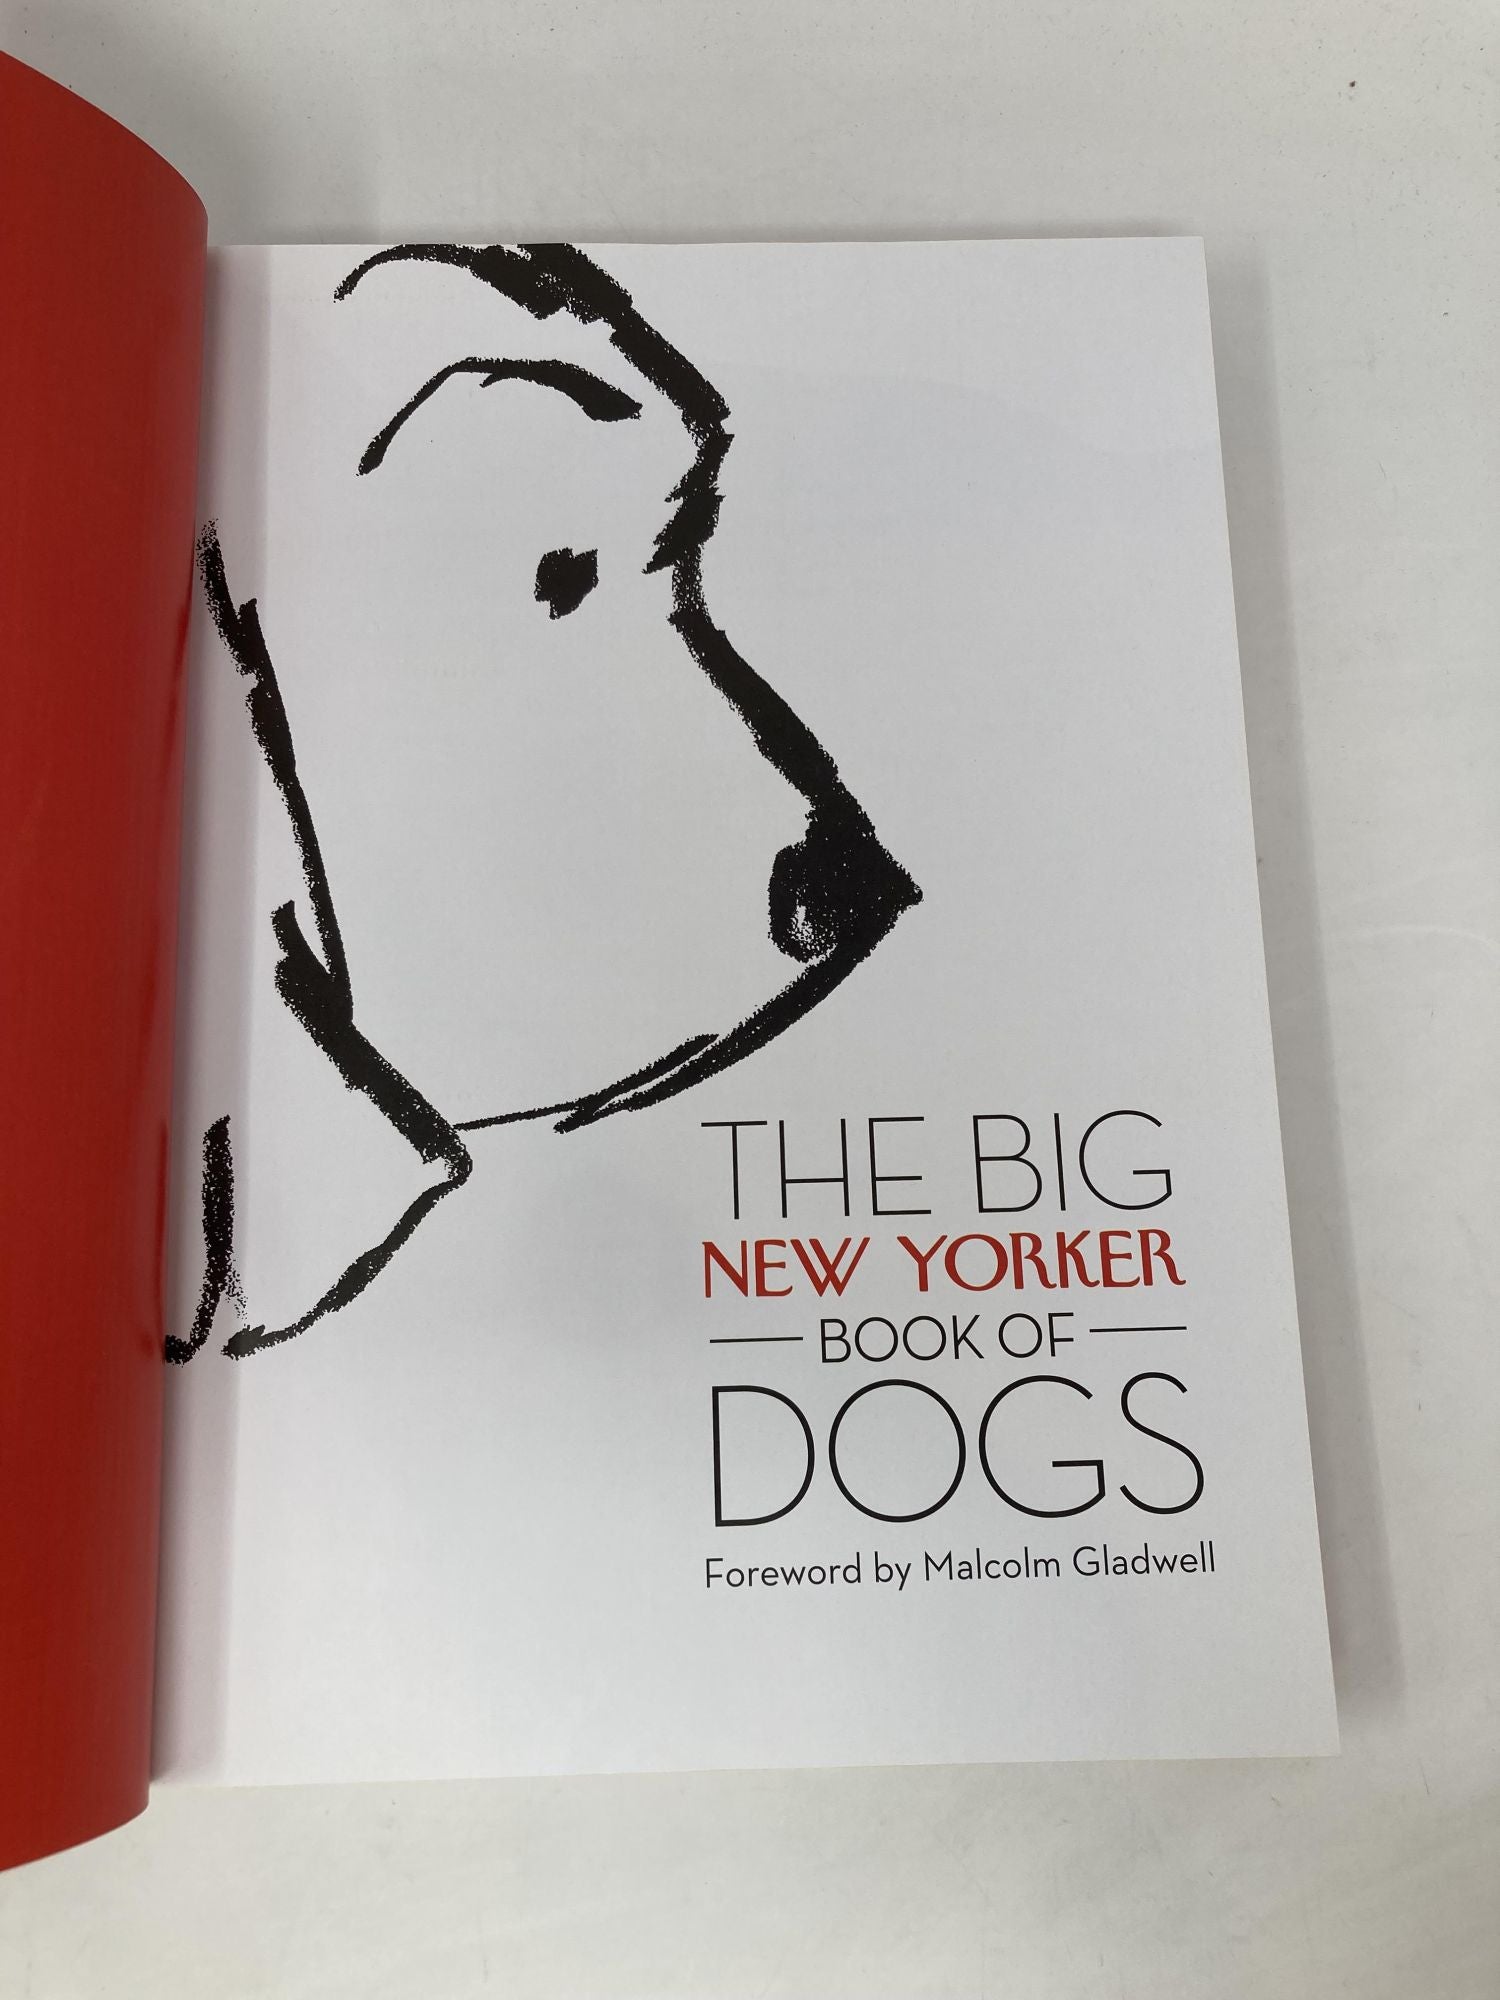 The Big New Yorker Book of Dogs by The New Magazine Yorker on Sag Harbor  Books